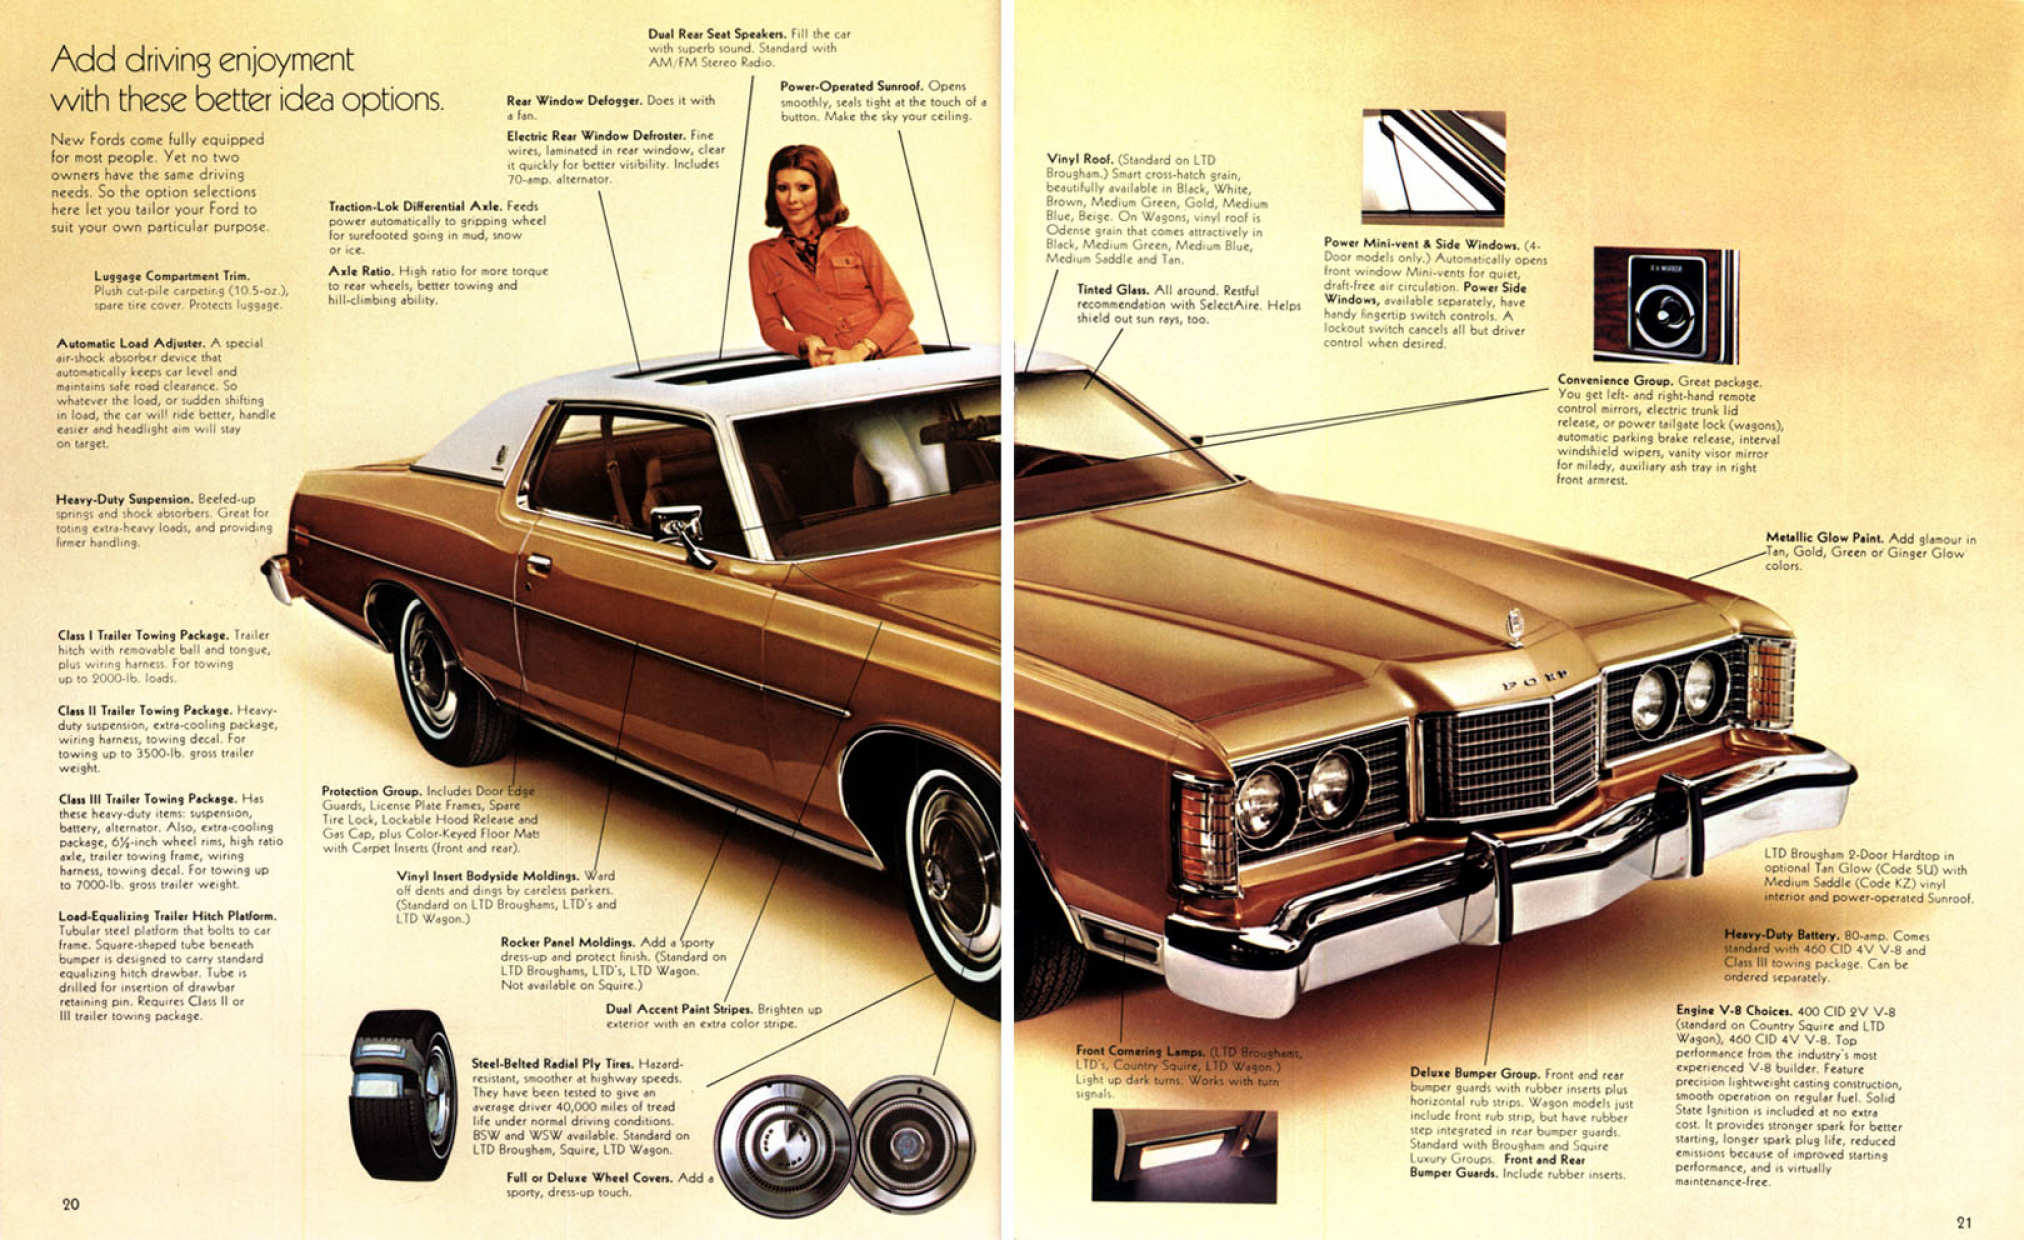 1974_Ford_Full_Size-20-21